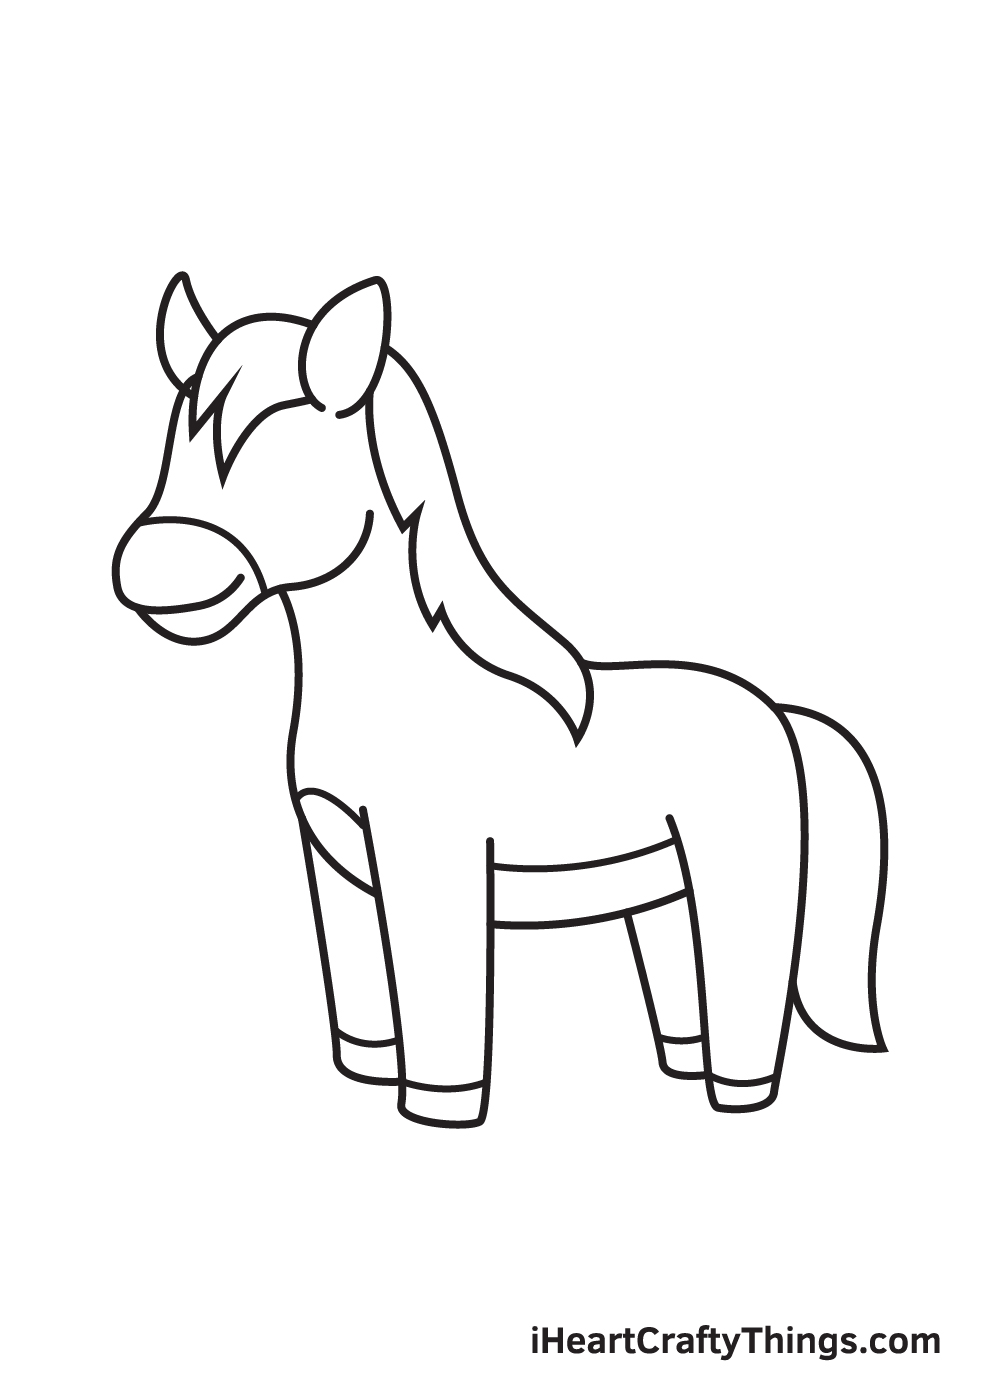 horse drawing - step 8